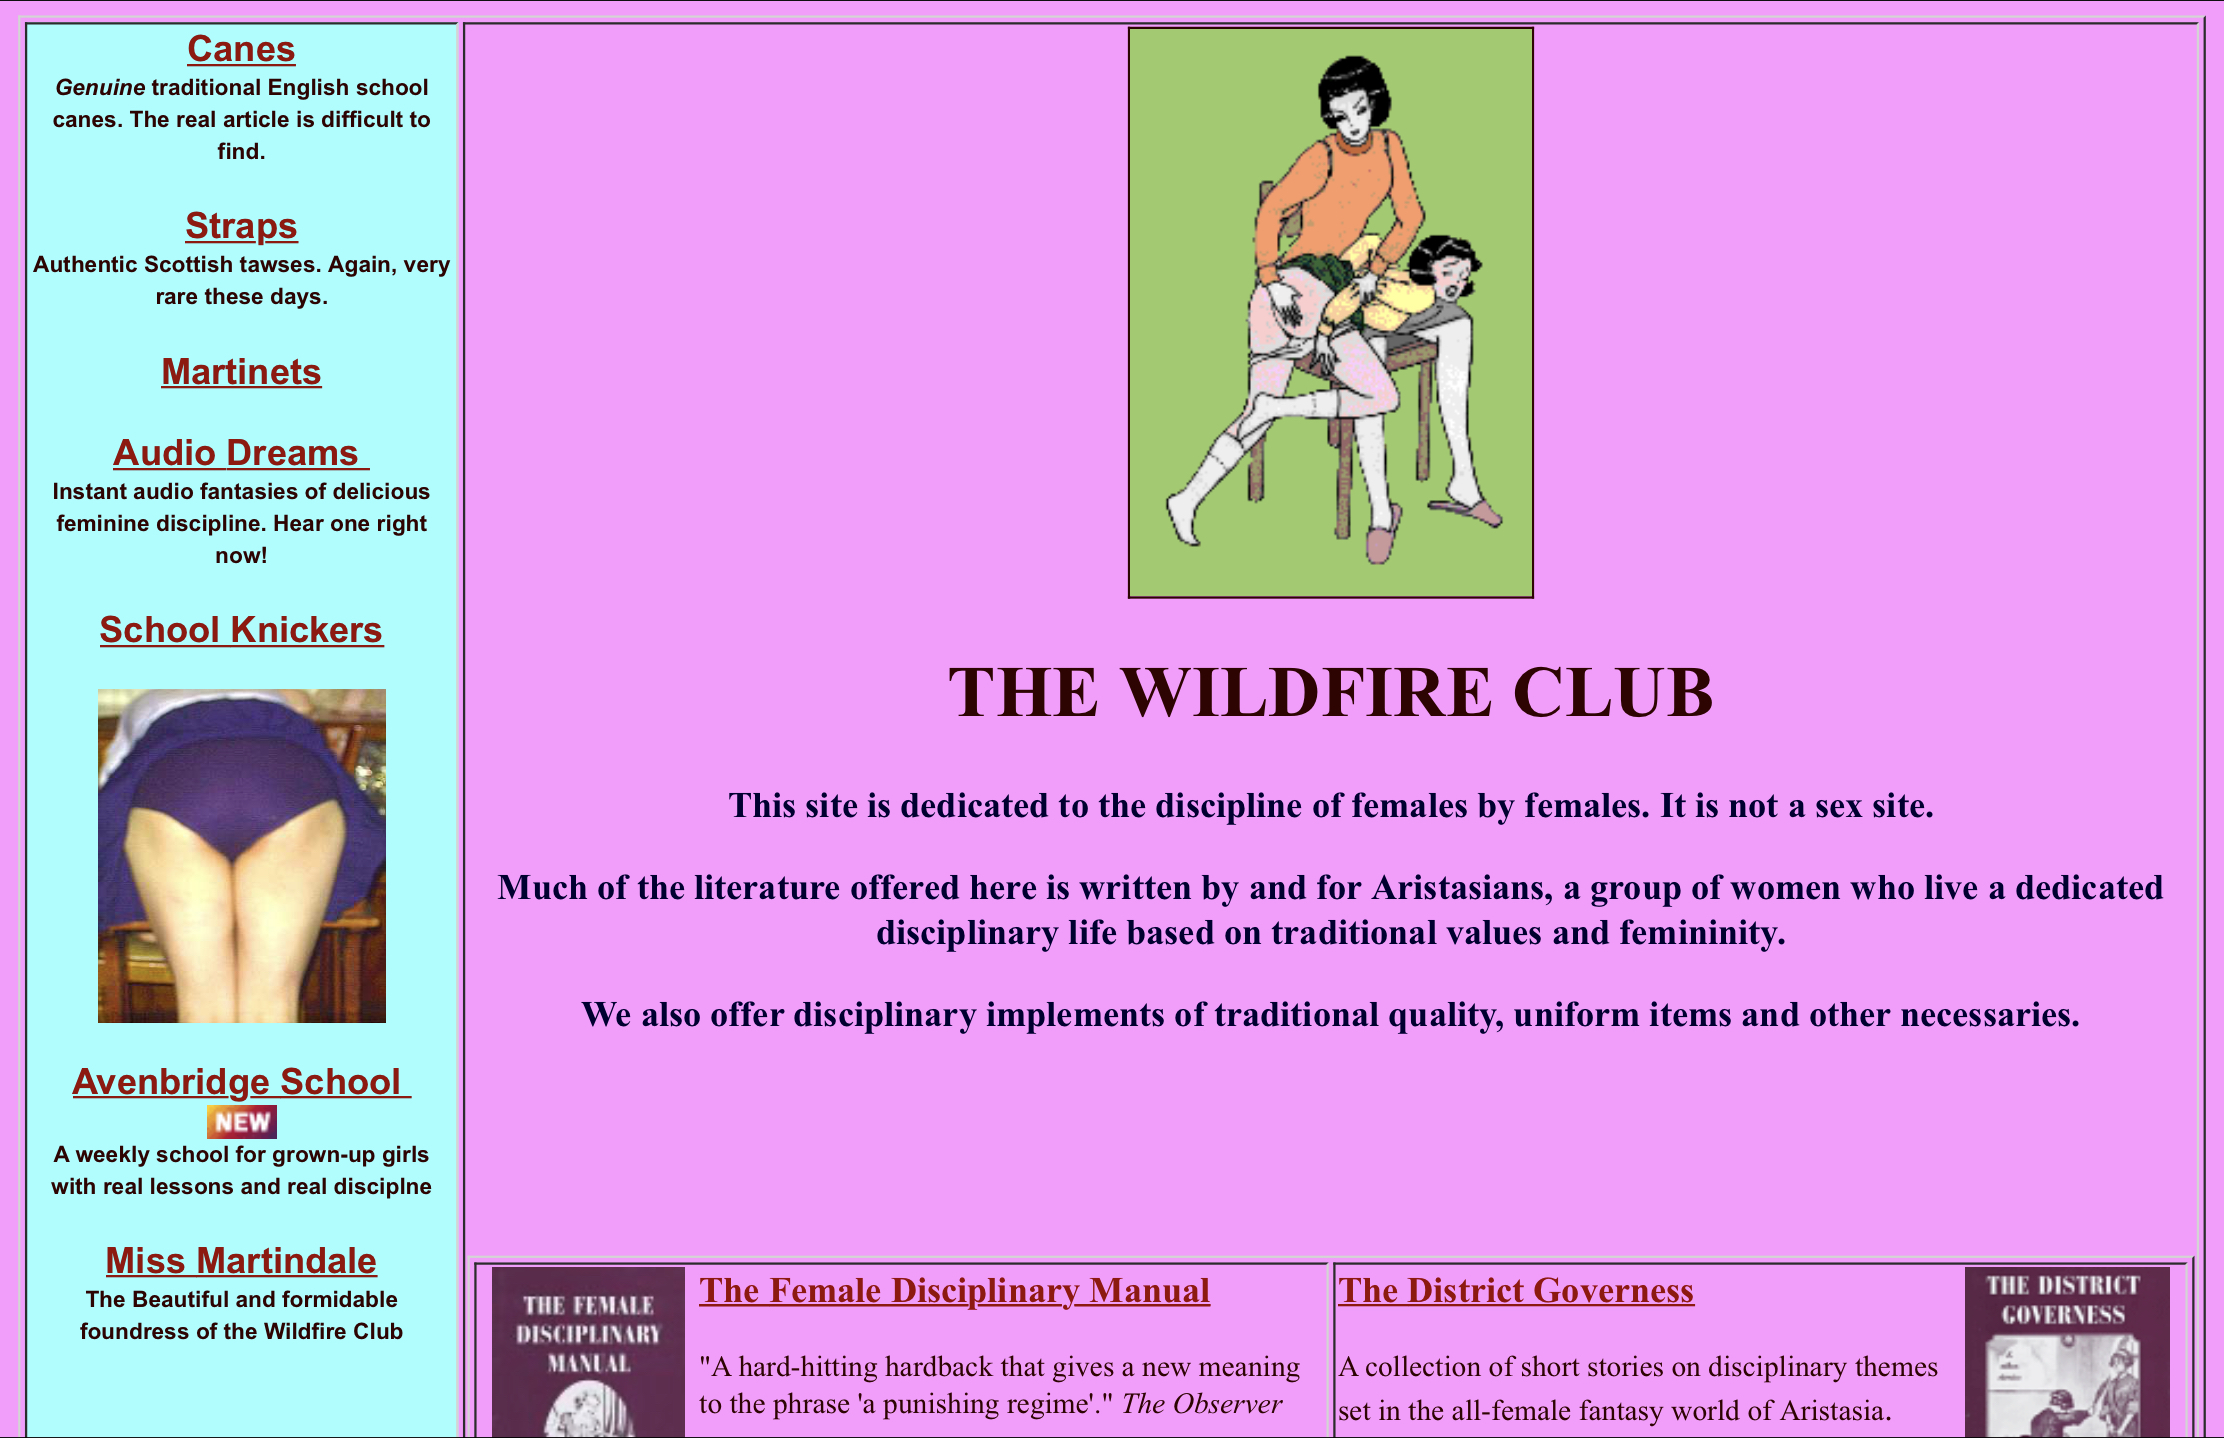 A screenshot from the Wildfire Club website from 2004.